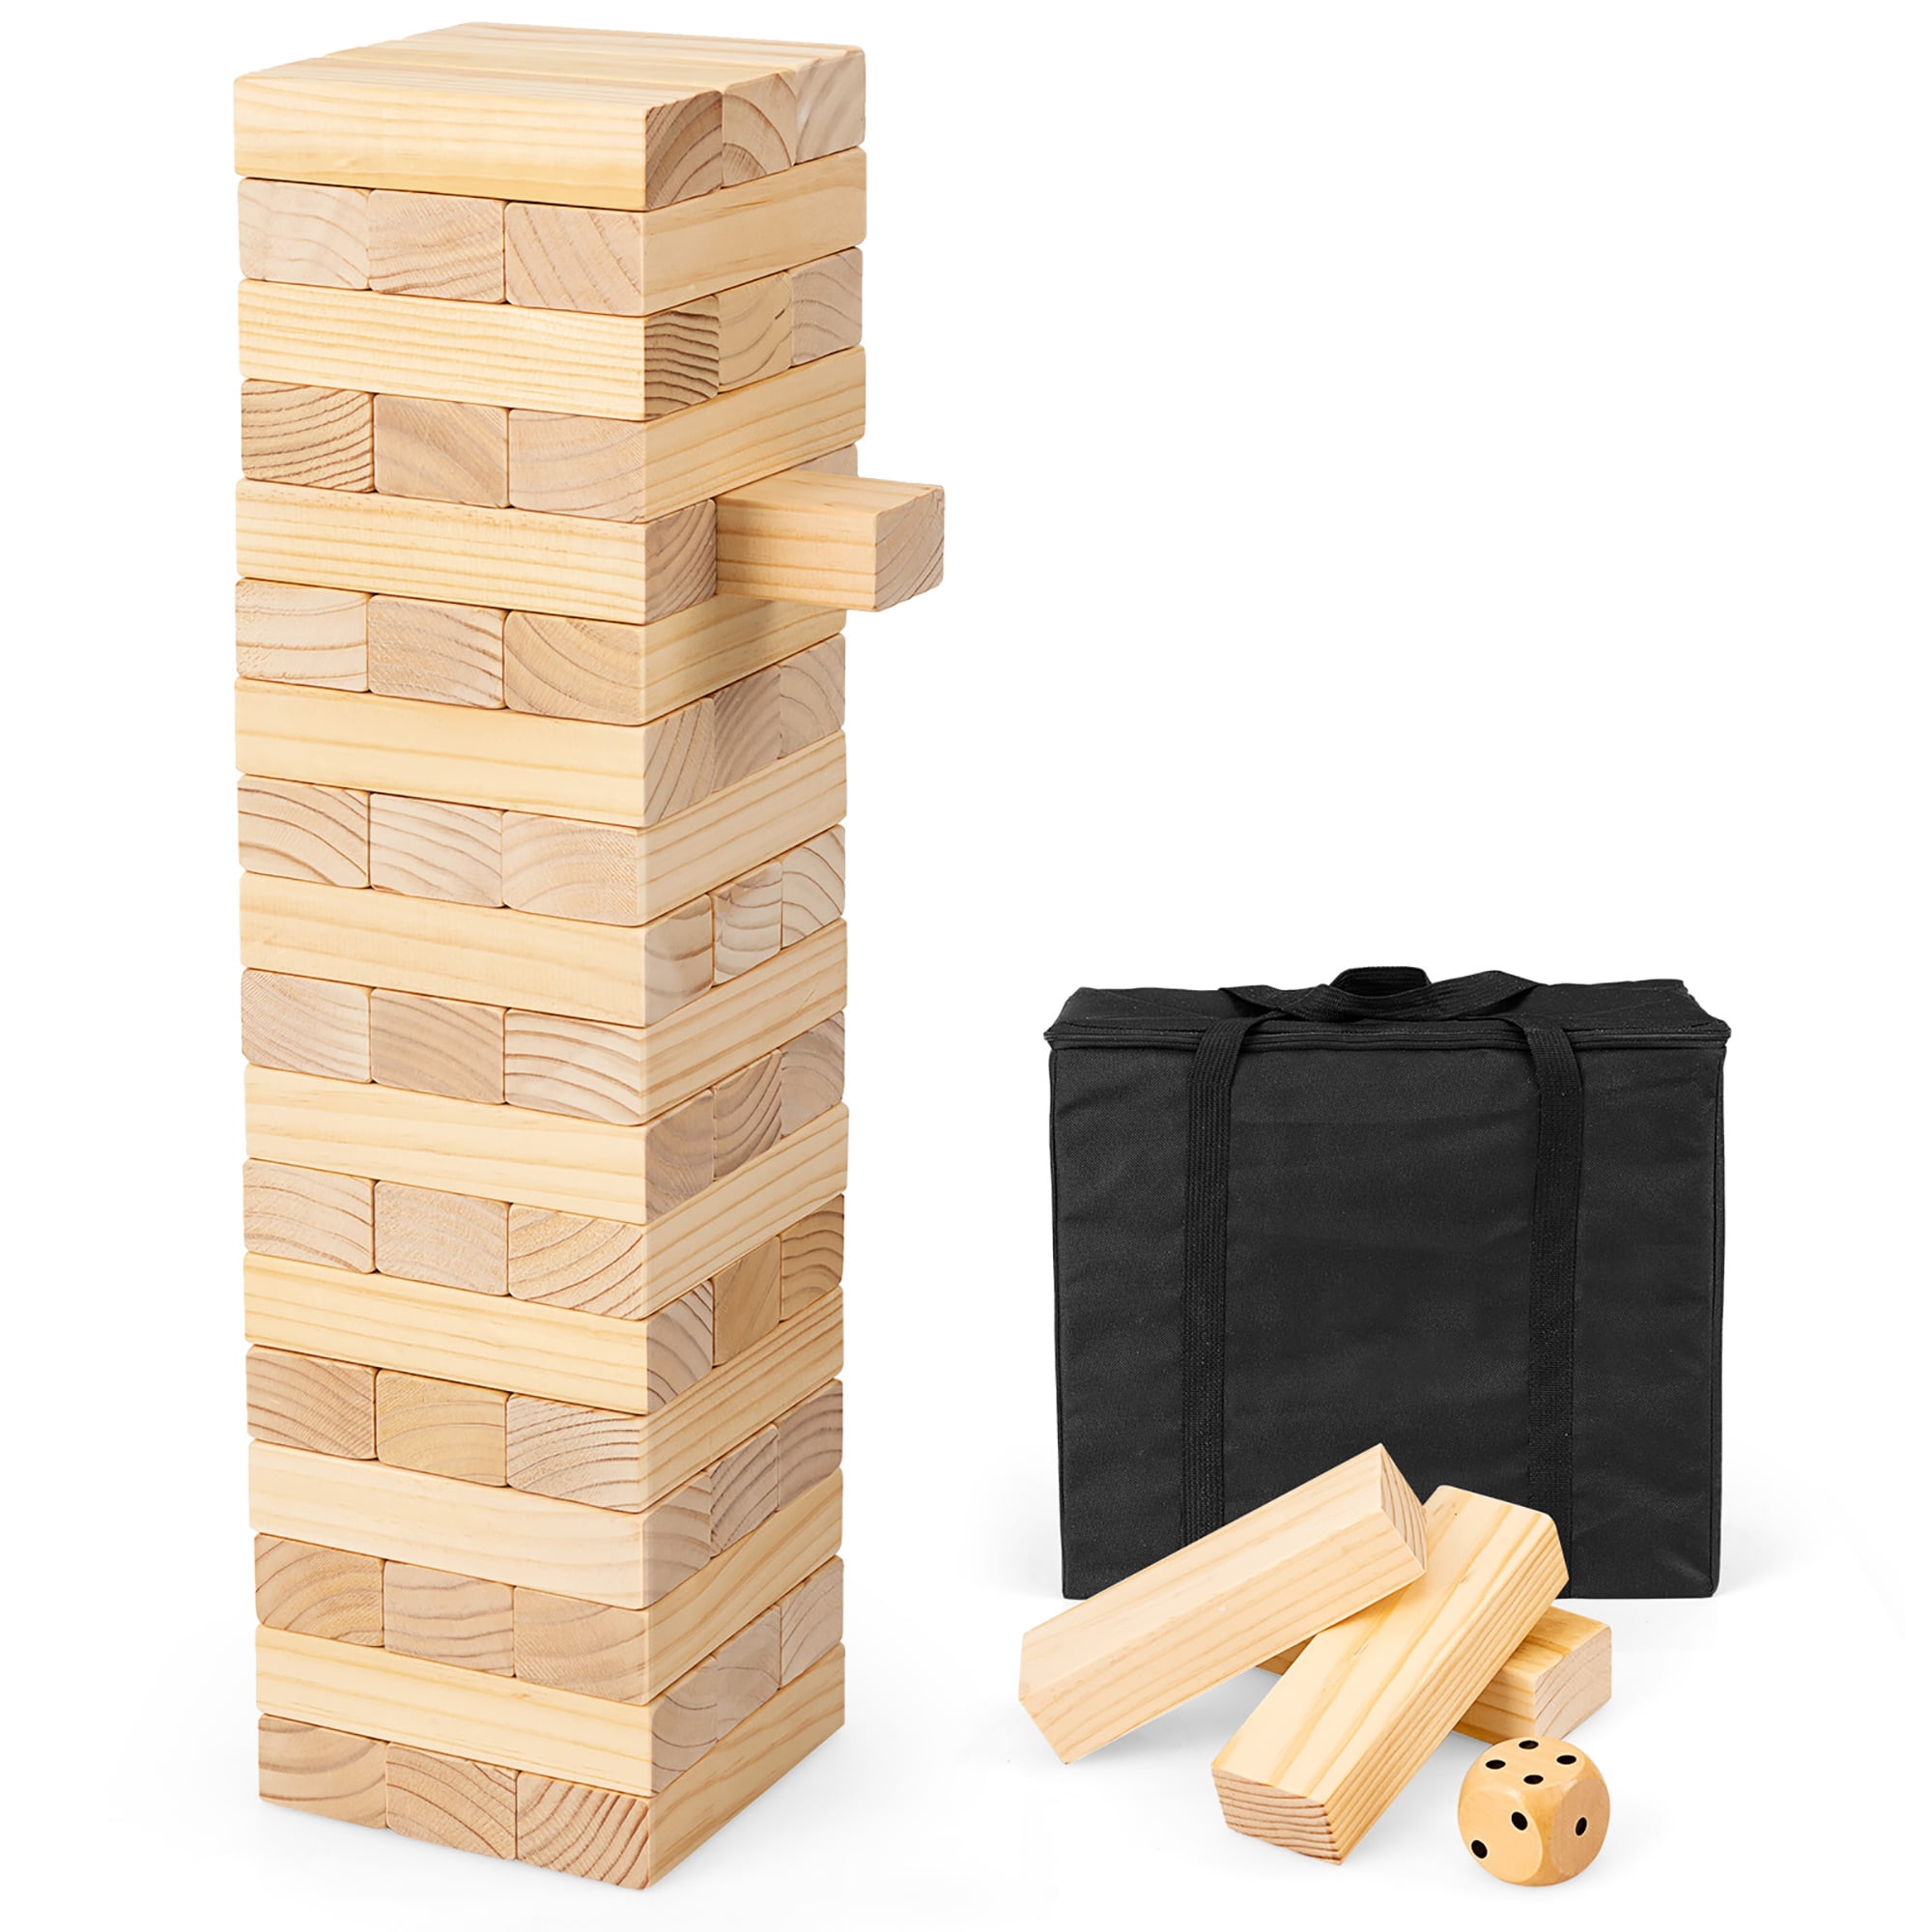 Solid Wooden Tumbling Tower Game Great Executive Toy. 54 Pieces 